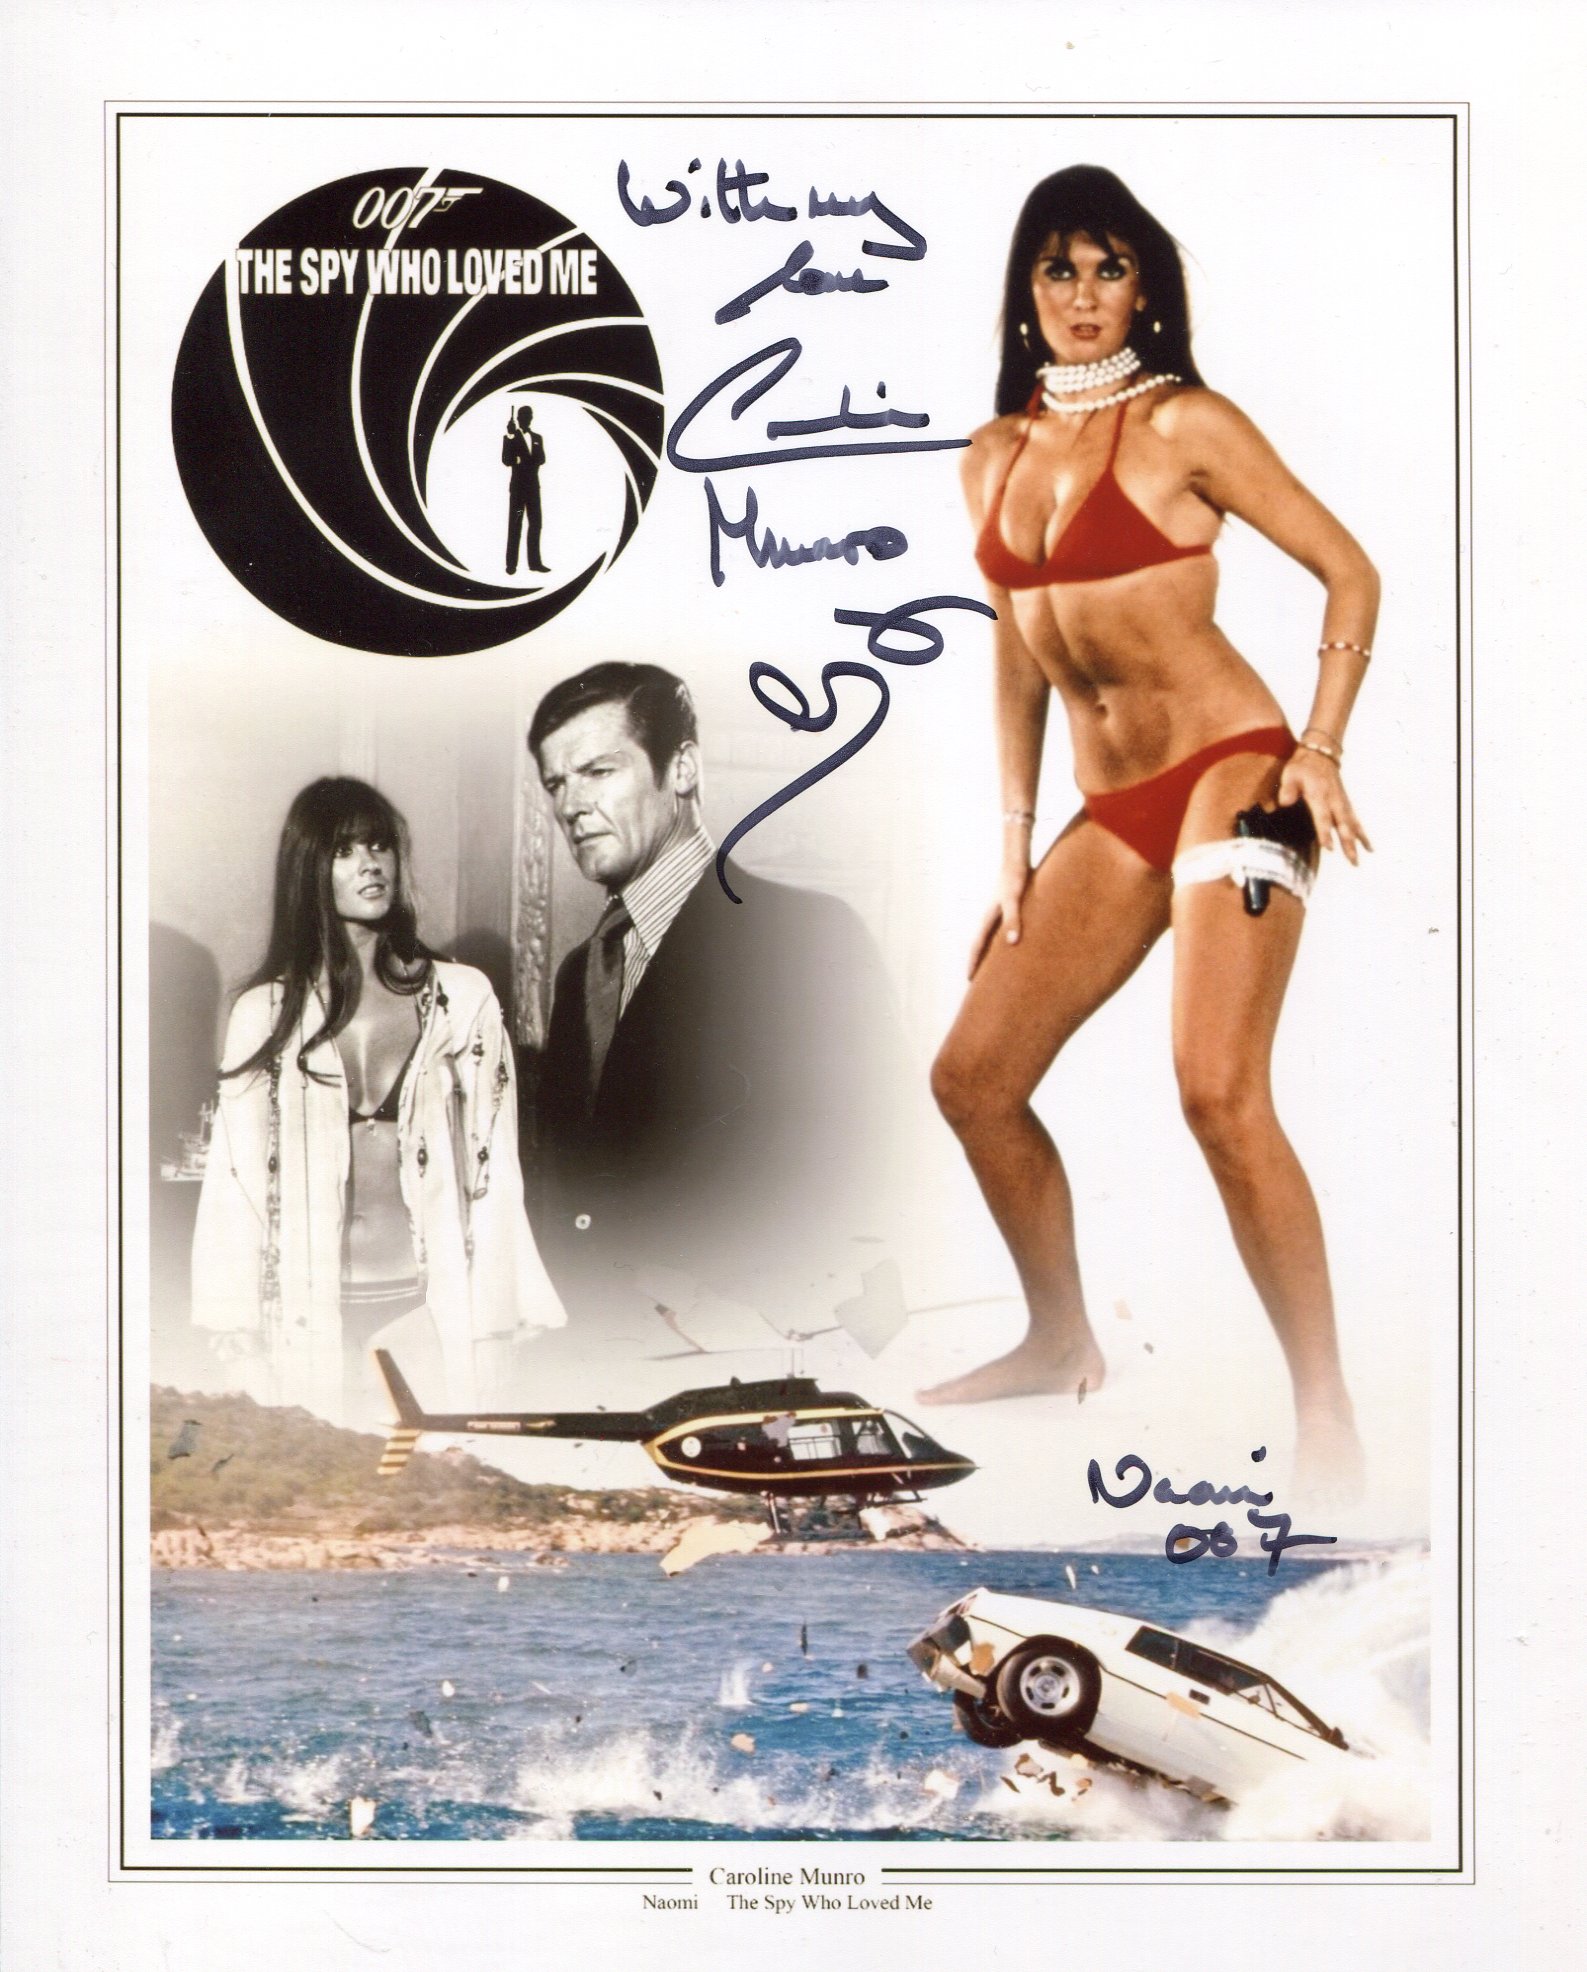 007 James Bond 8x10 The Spy Who Loved Me montage photo signed by Caroline Munro. Good condition